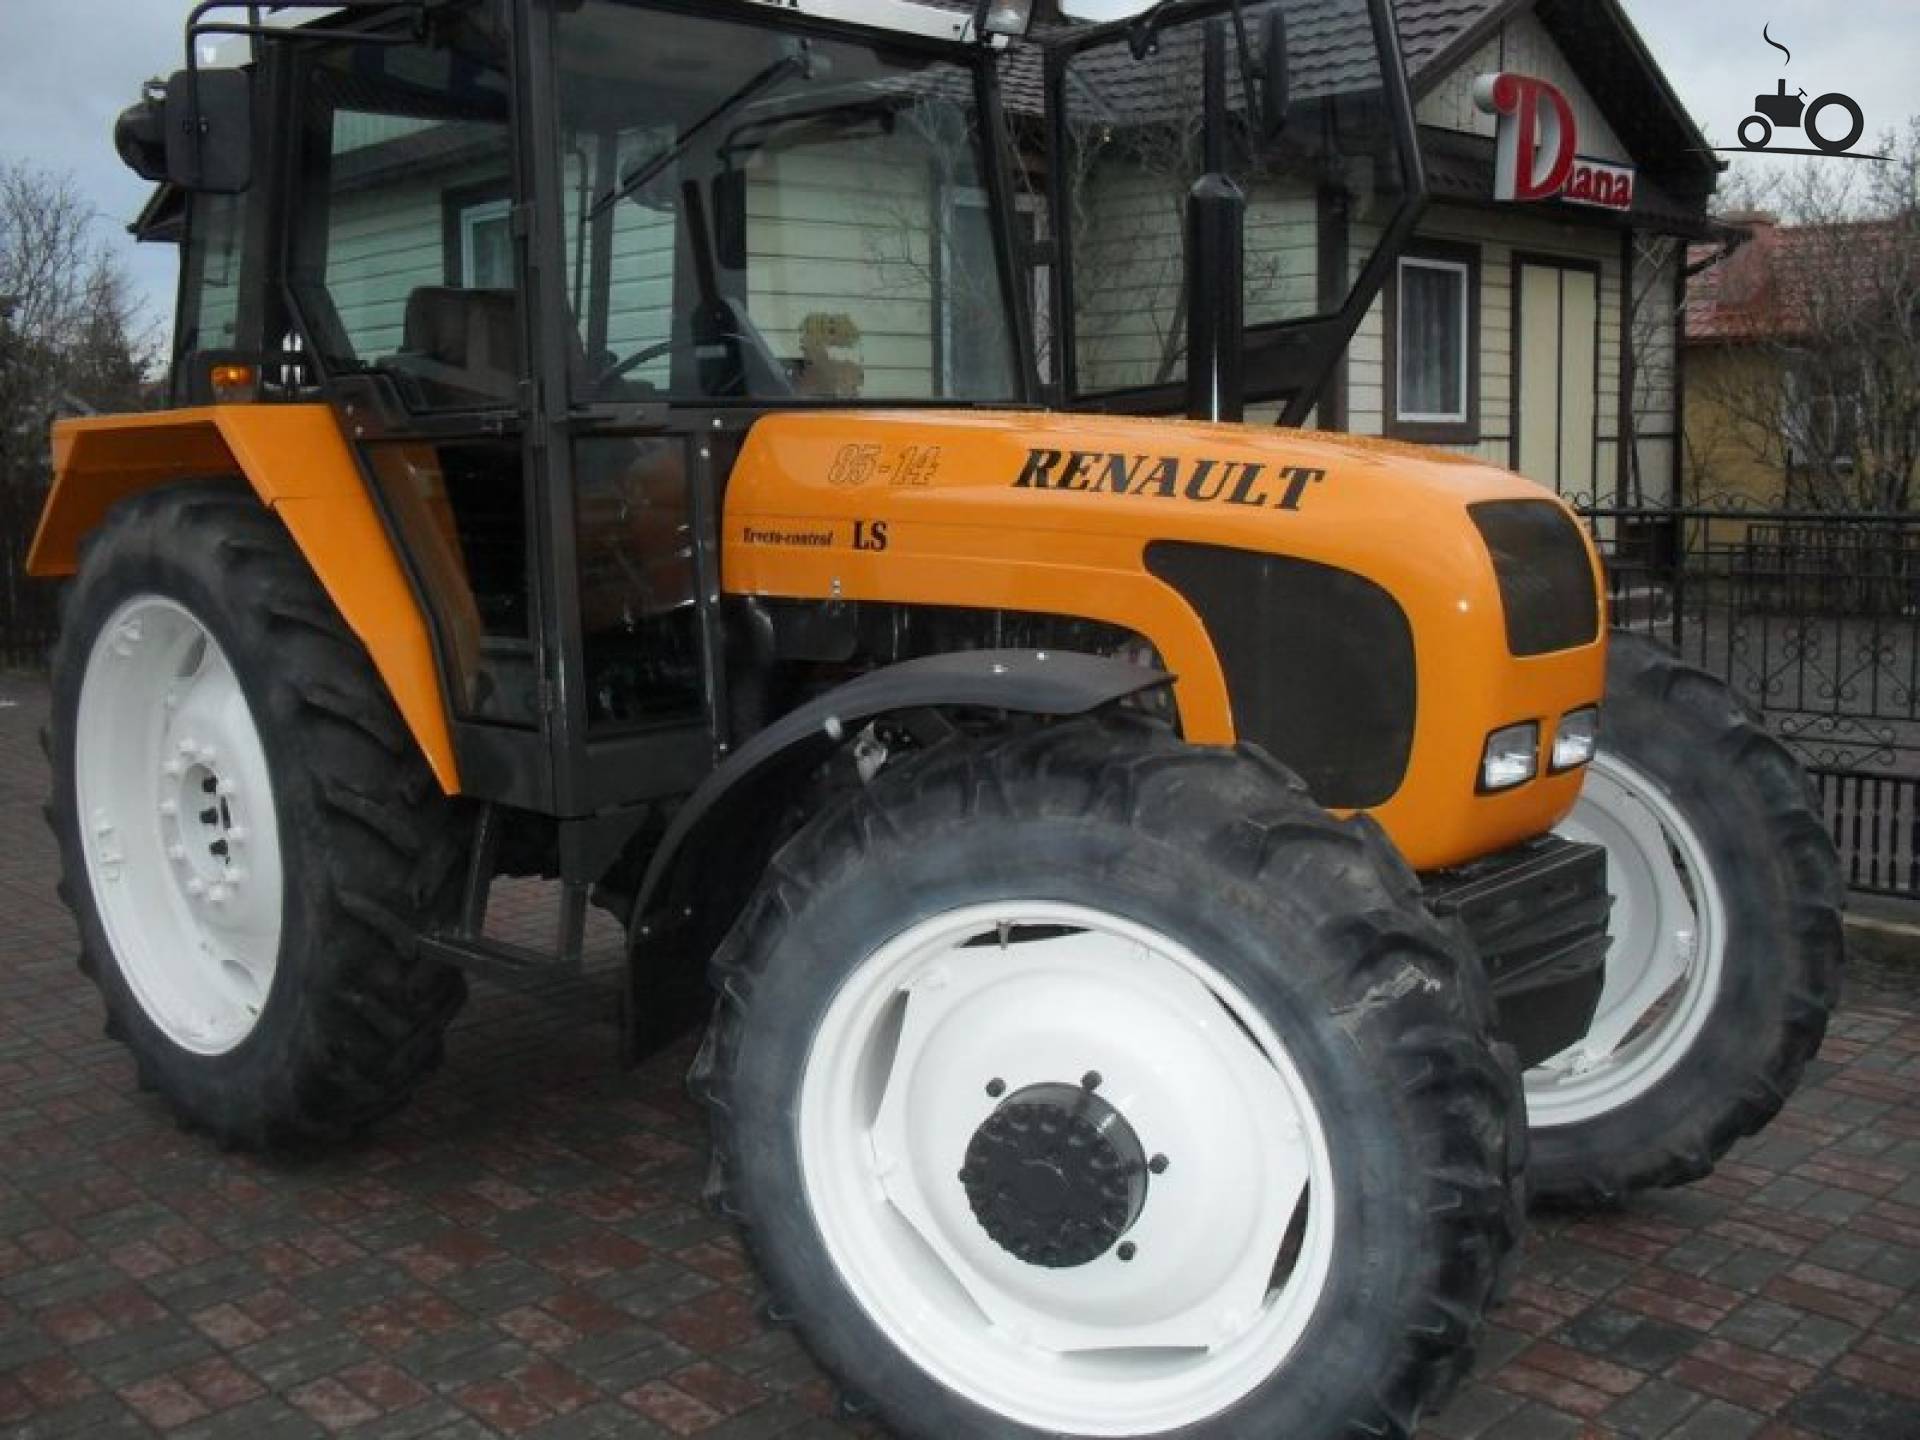 Tractor Renault 85 14 Pictures to pin on Pinterest